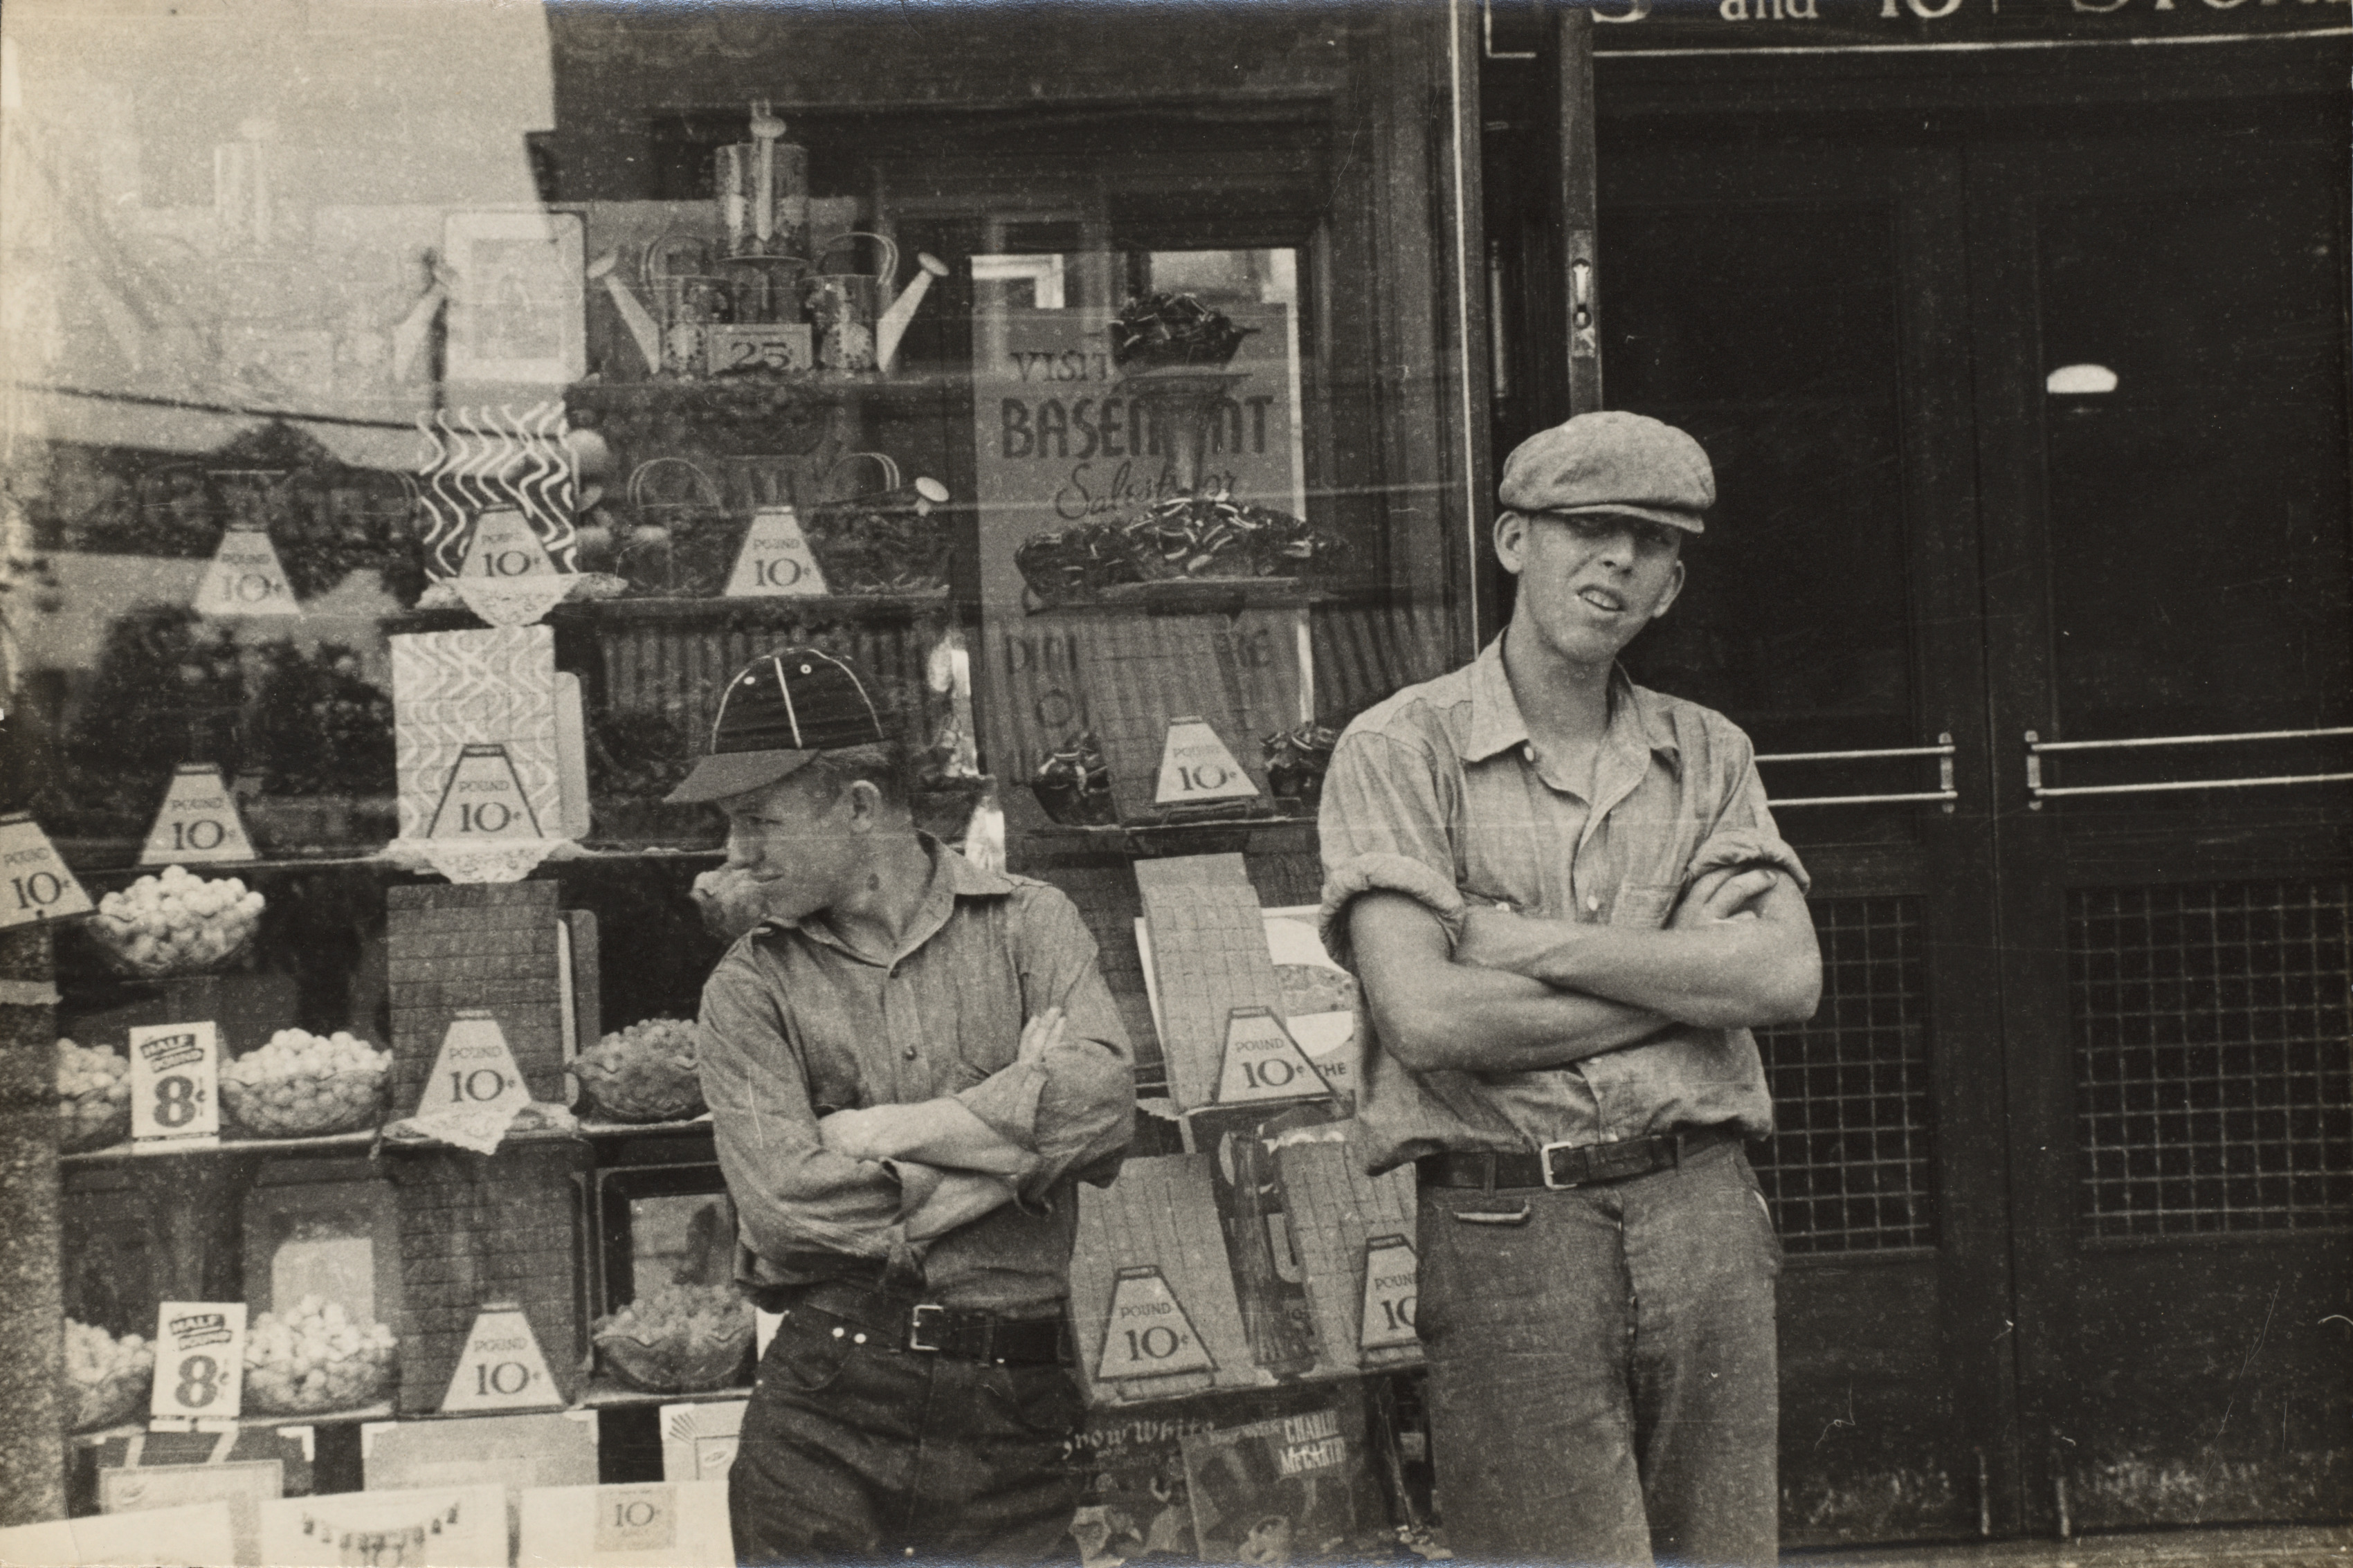 Two boys standing in front of candy store window, street scene, Circleville, Ohio